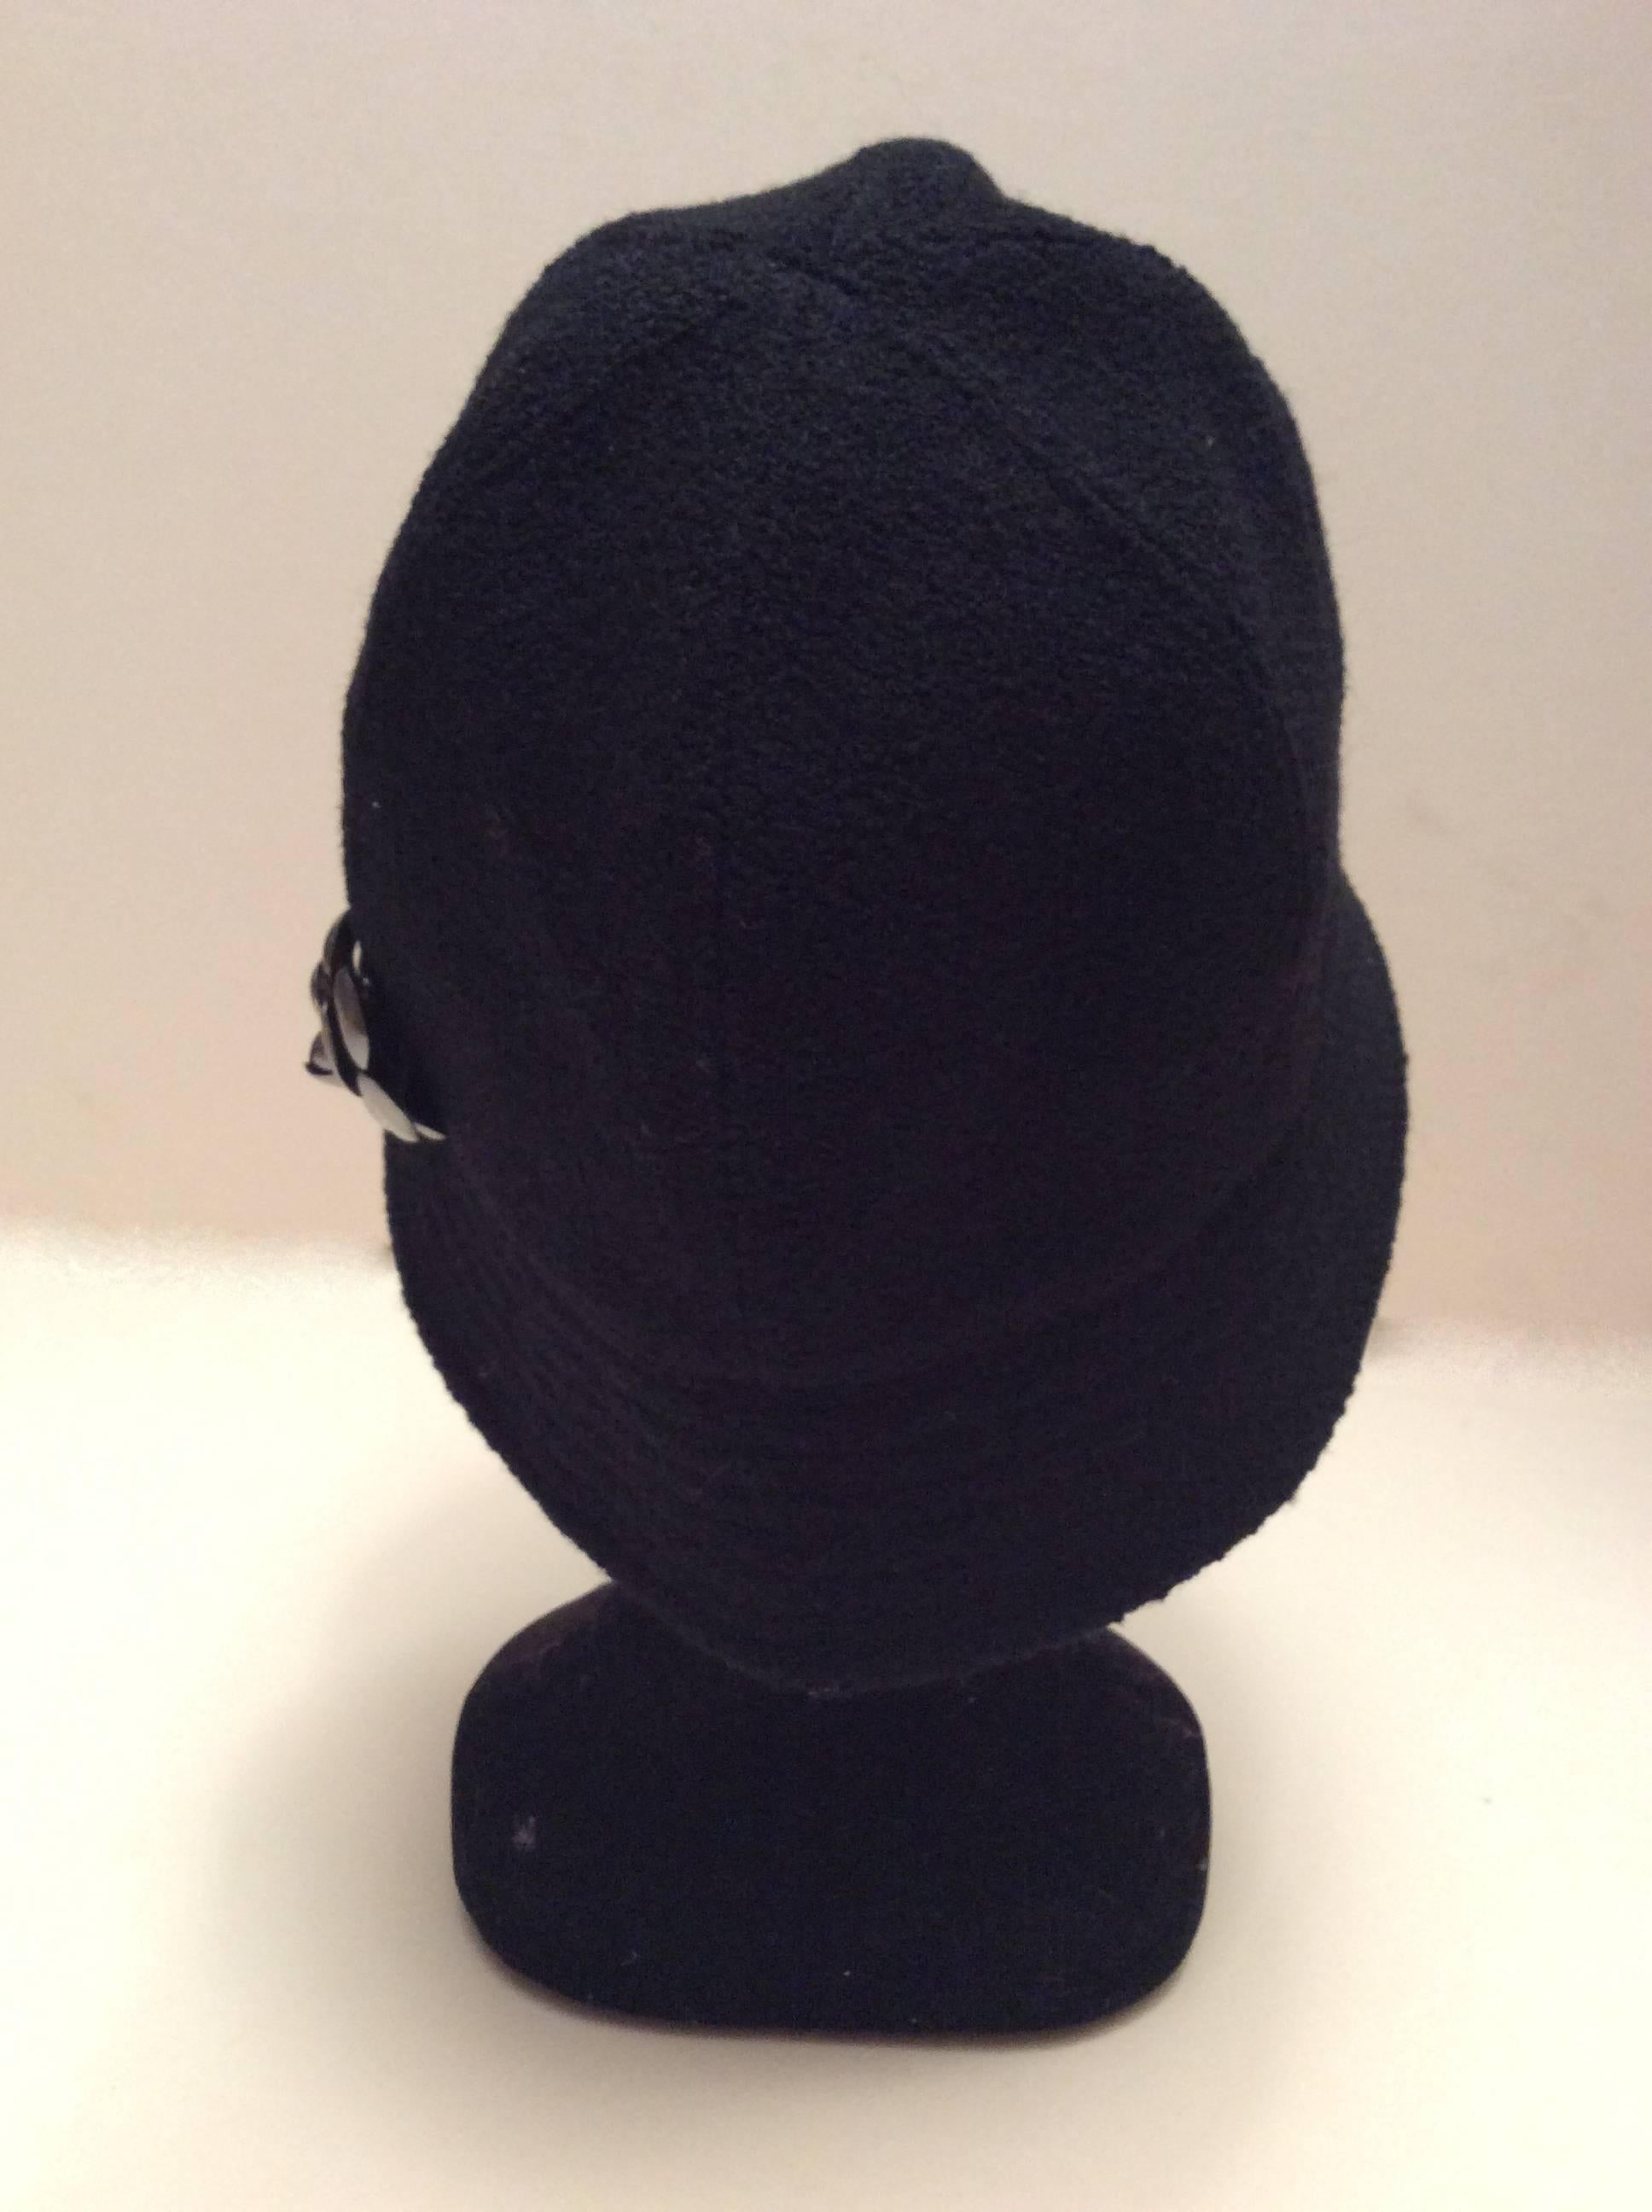 Here is a magnificent Chanel hat that is made of black boucle fabric. It is size 57 is adorned with a gray silver tone metal camellia emblem on the exterior of the hat. There is a 2.1 inche rim around the exterior of the hat. There is 8.5 inches of